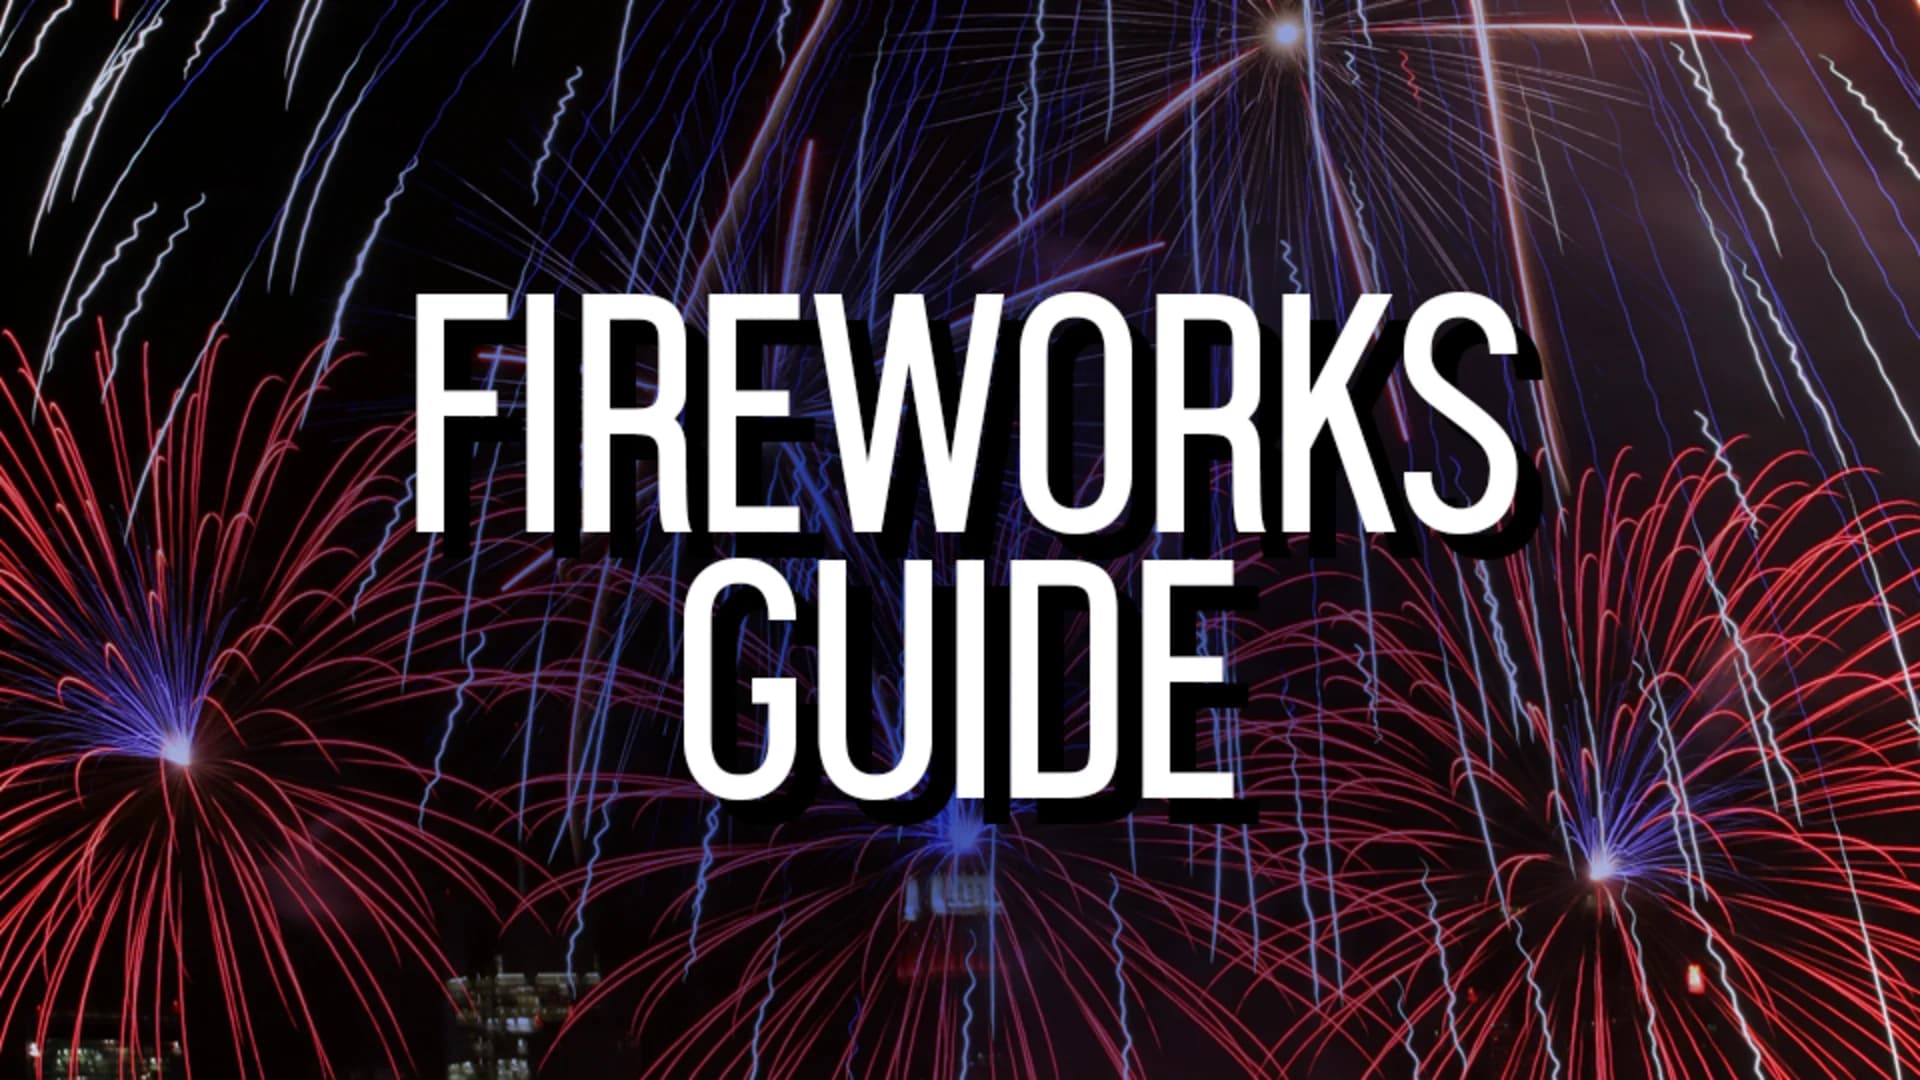 2017 Guide: Where to see fireworks in New Jersey